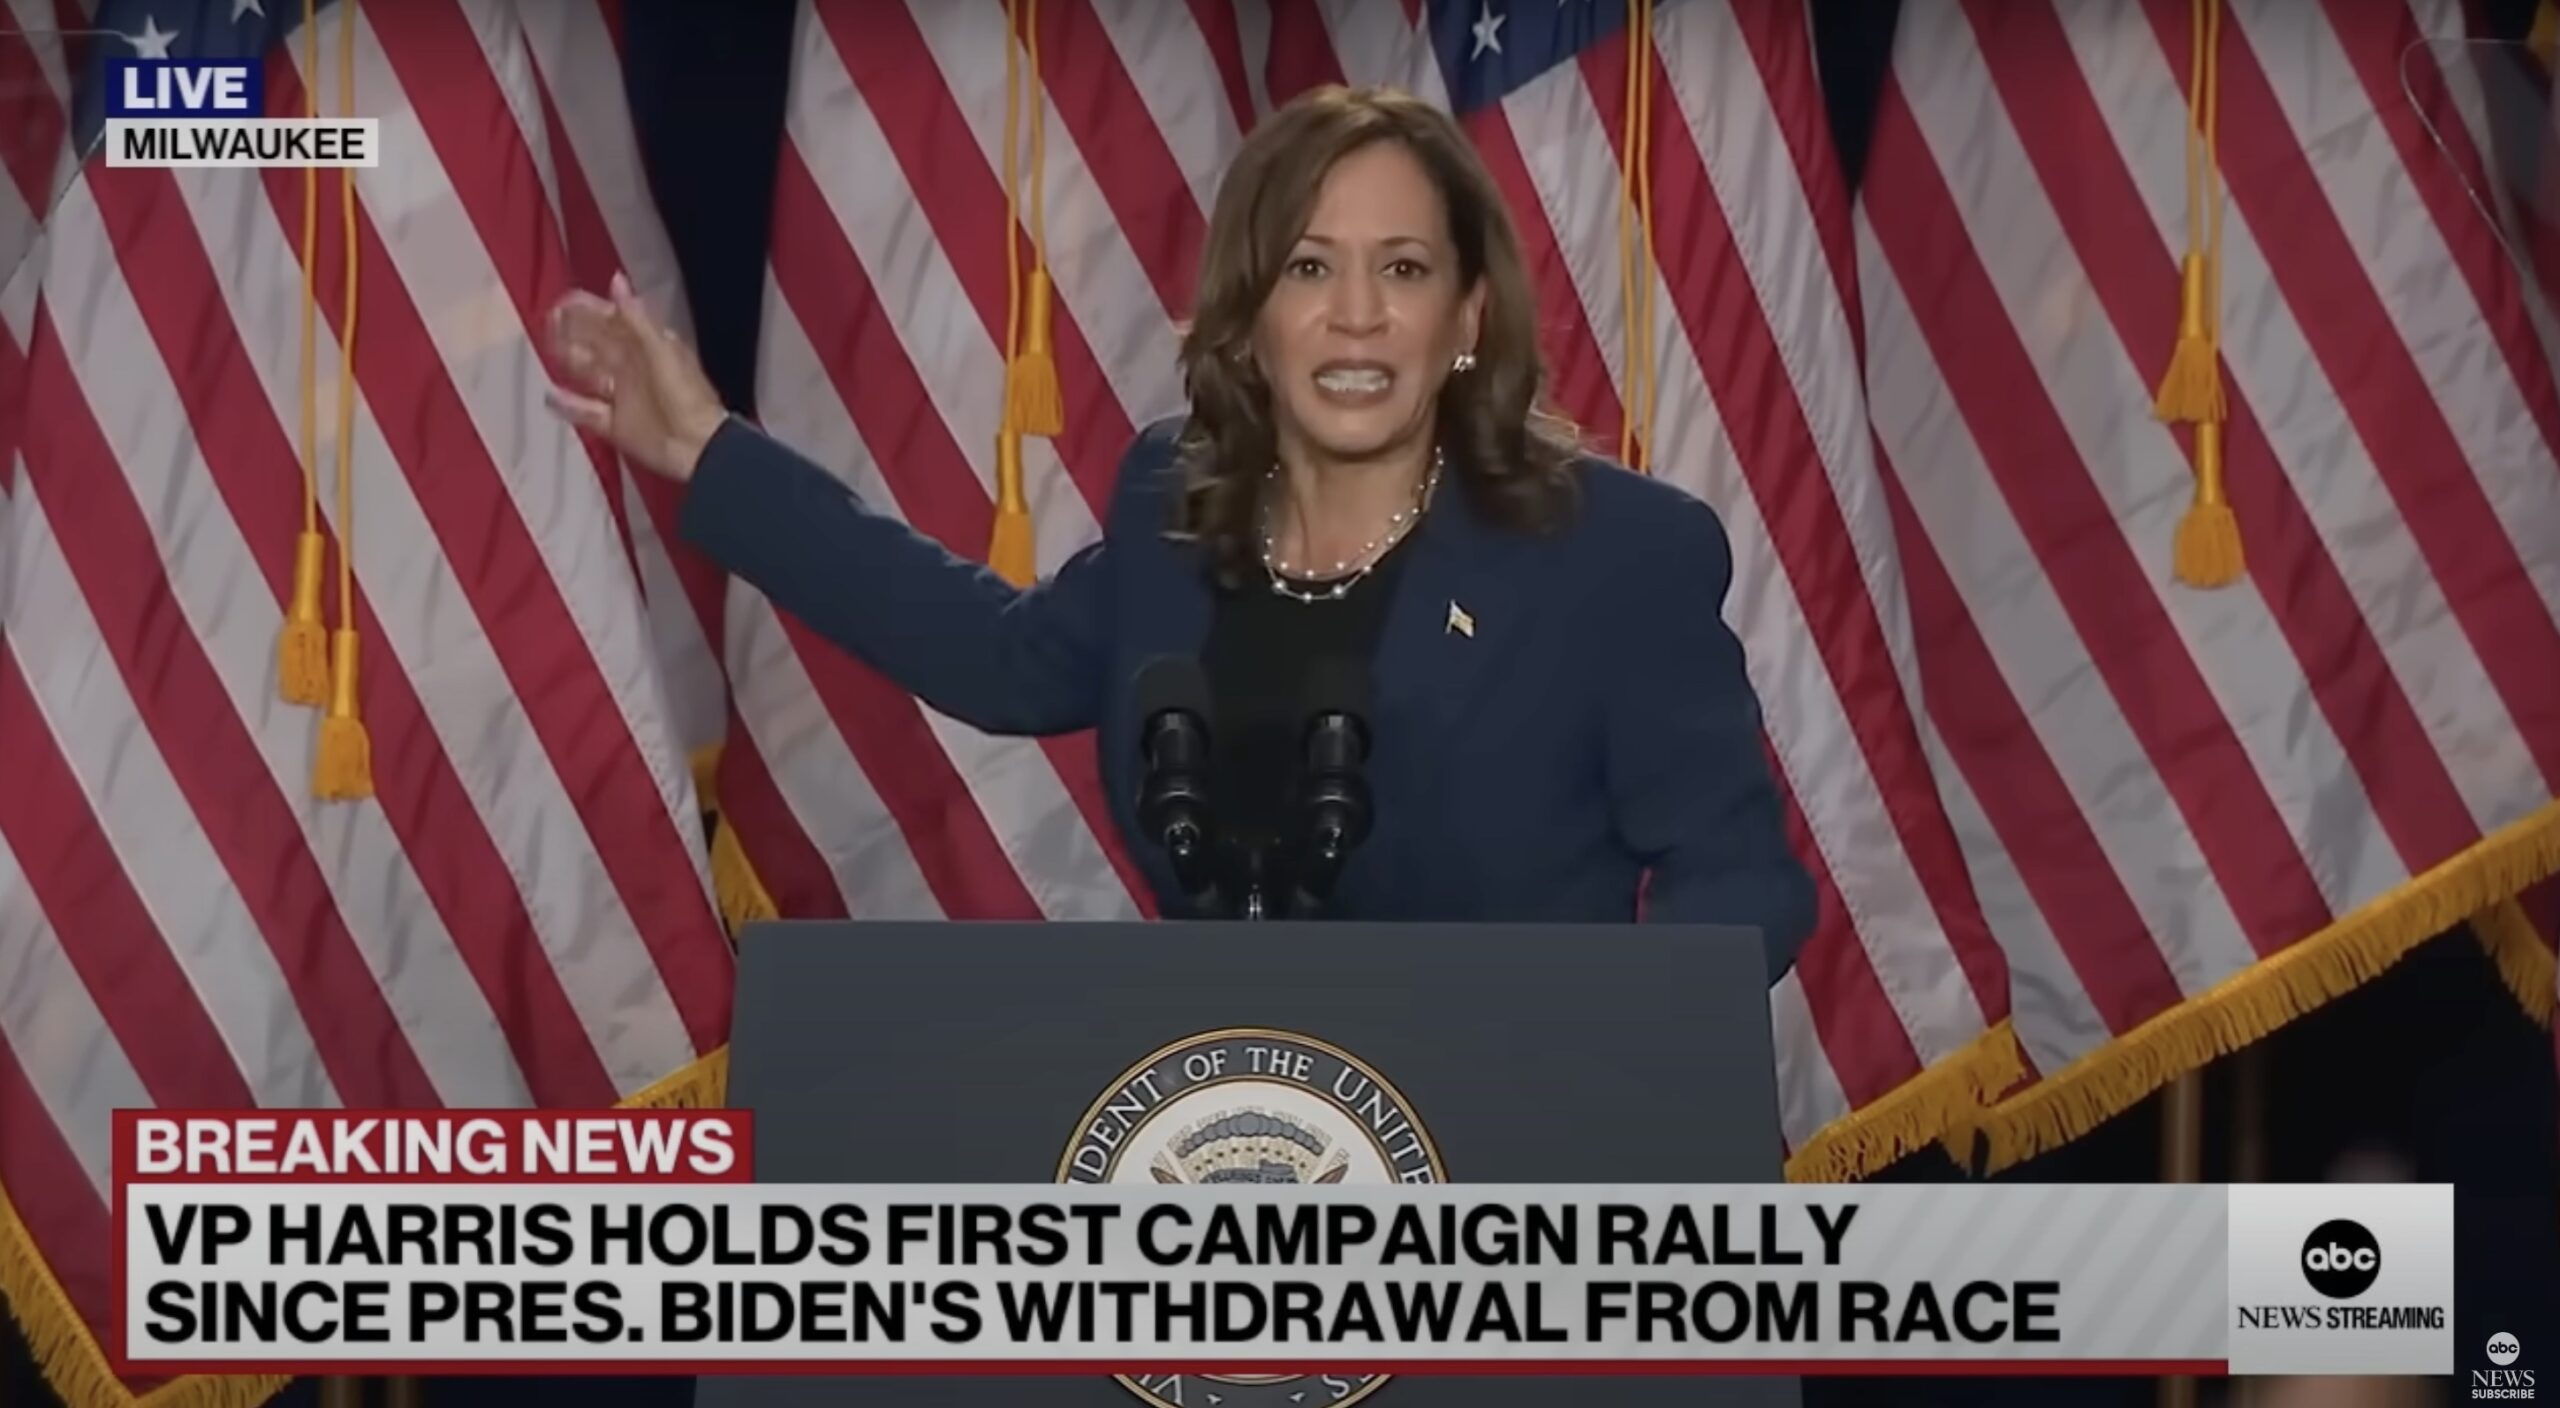 Democrats Head Into Smoke-Filled Rooms To Make Kamala Queen